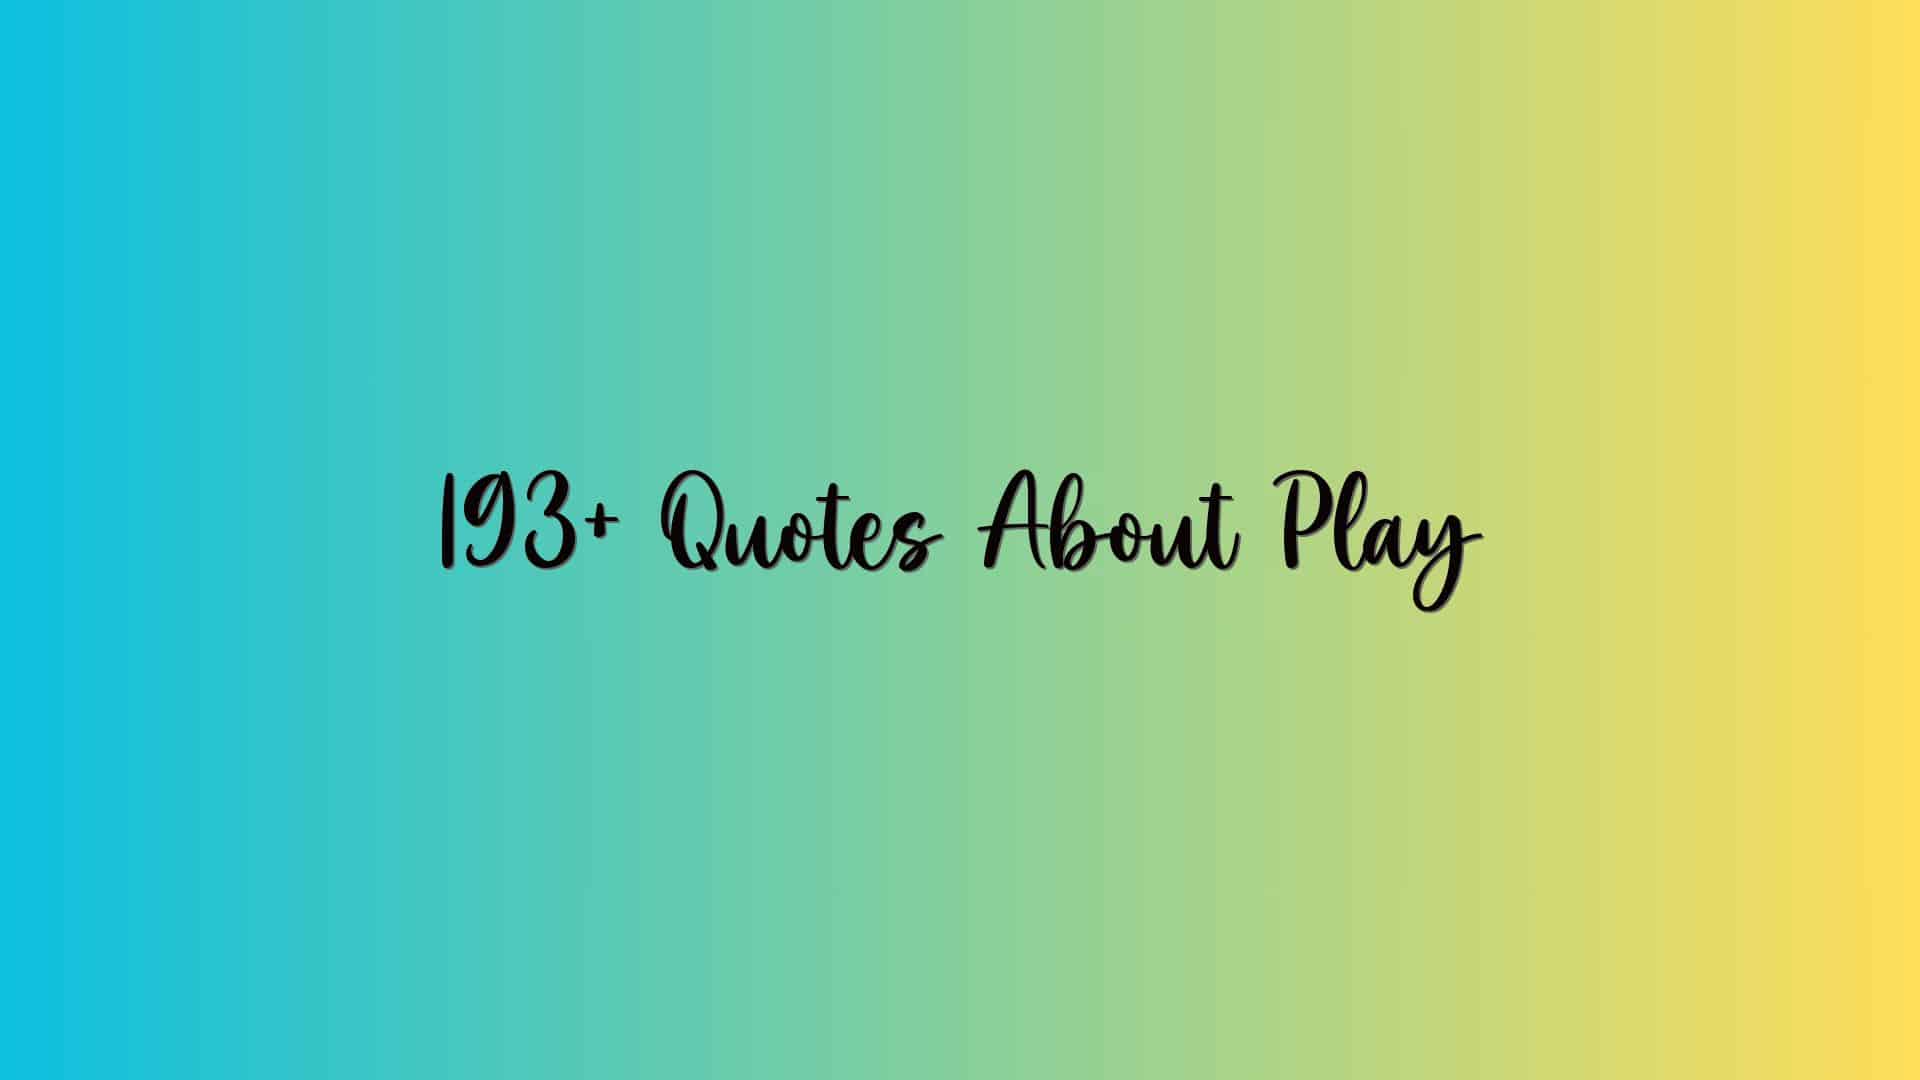 193+ Quotes About Play